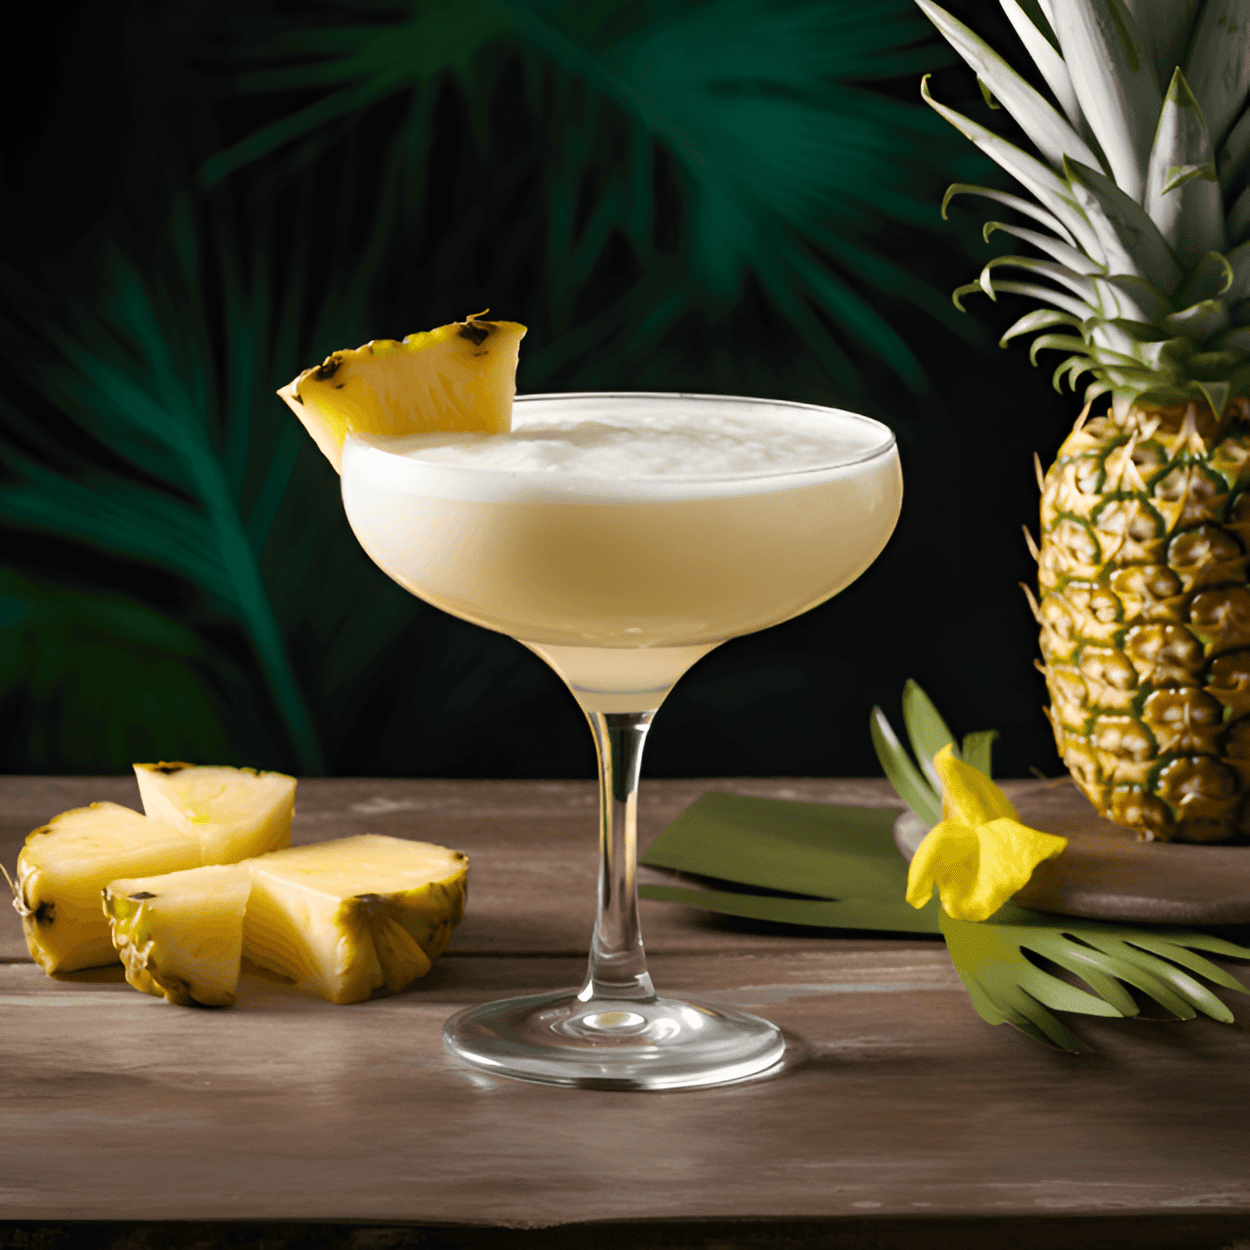 Kokomo Cocktail Recipe - The Kokomo cocktail is a sweet, fruity, and slightly tangy drink. The combination of rum, pineapple juice, and coconut cream gives it a tropical, refreshing taste. The grenadine adds a hint of tartness, balancing out the sweetness of the other ingredients.